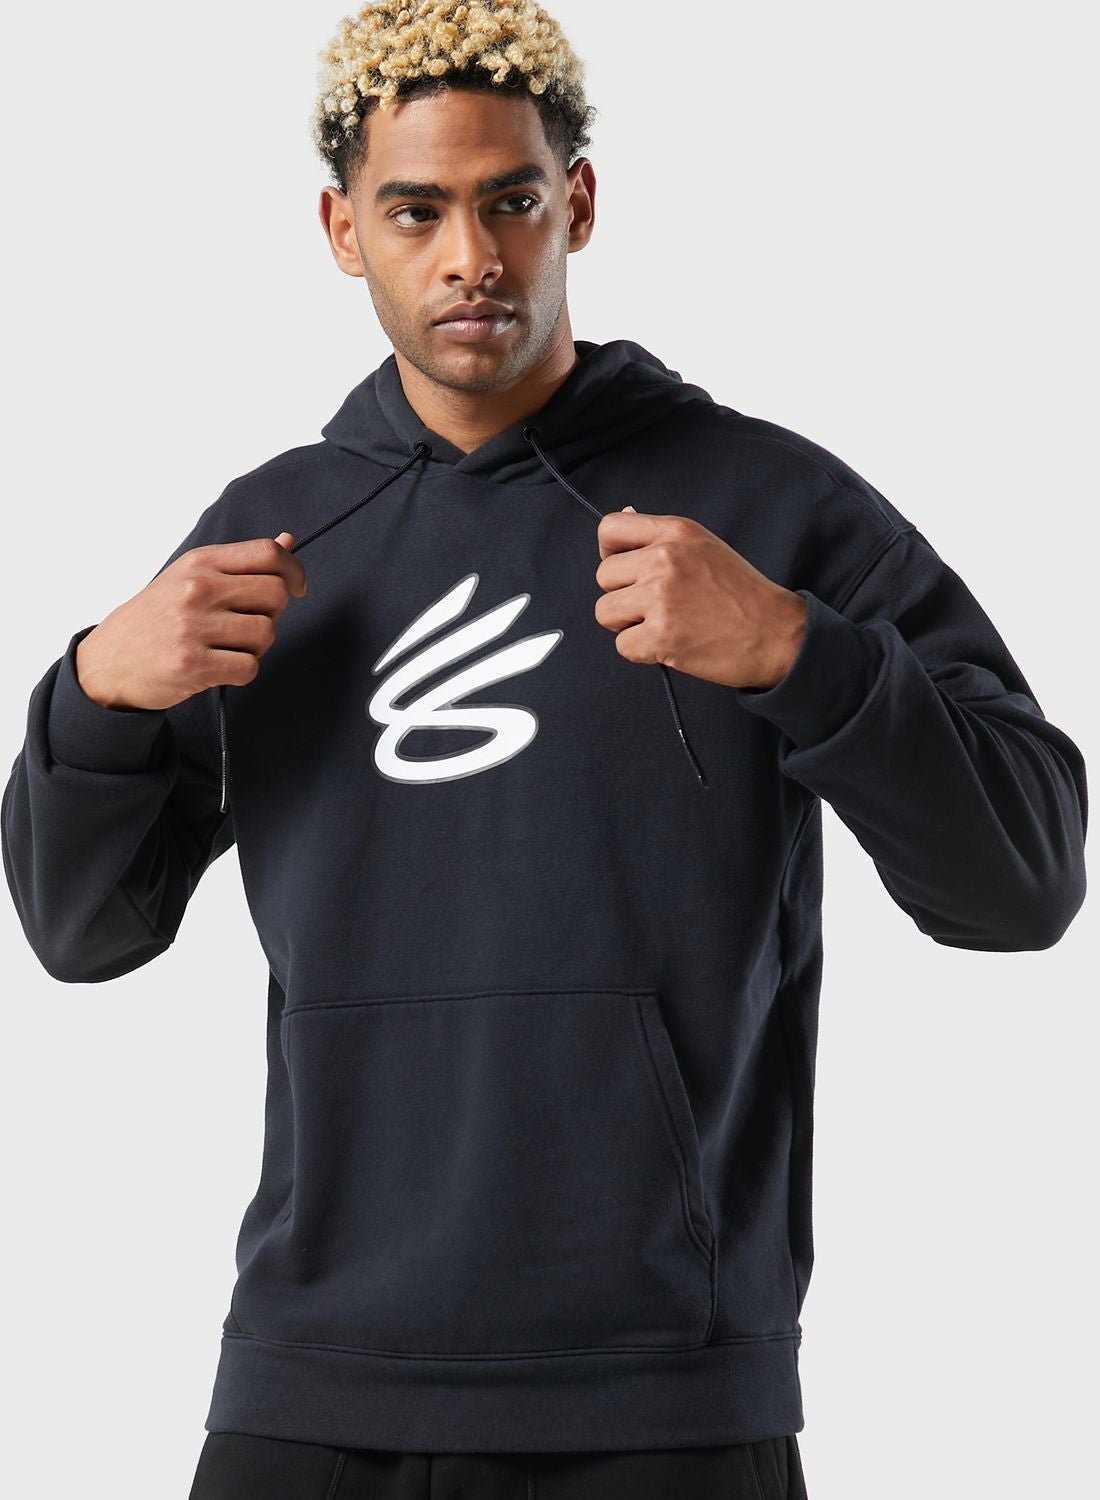 Stephen Curry Under Armour Sweatshirts & Hoodies for Sale